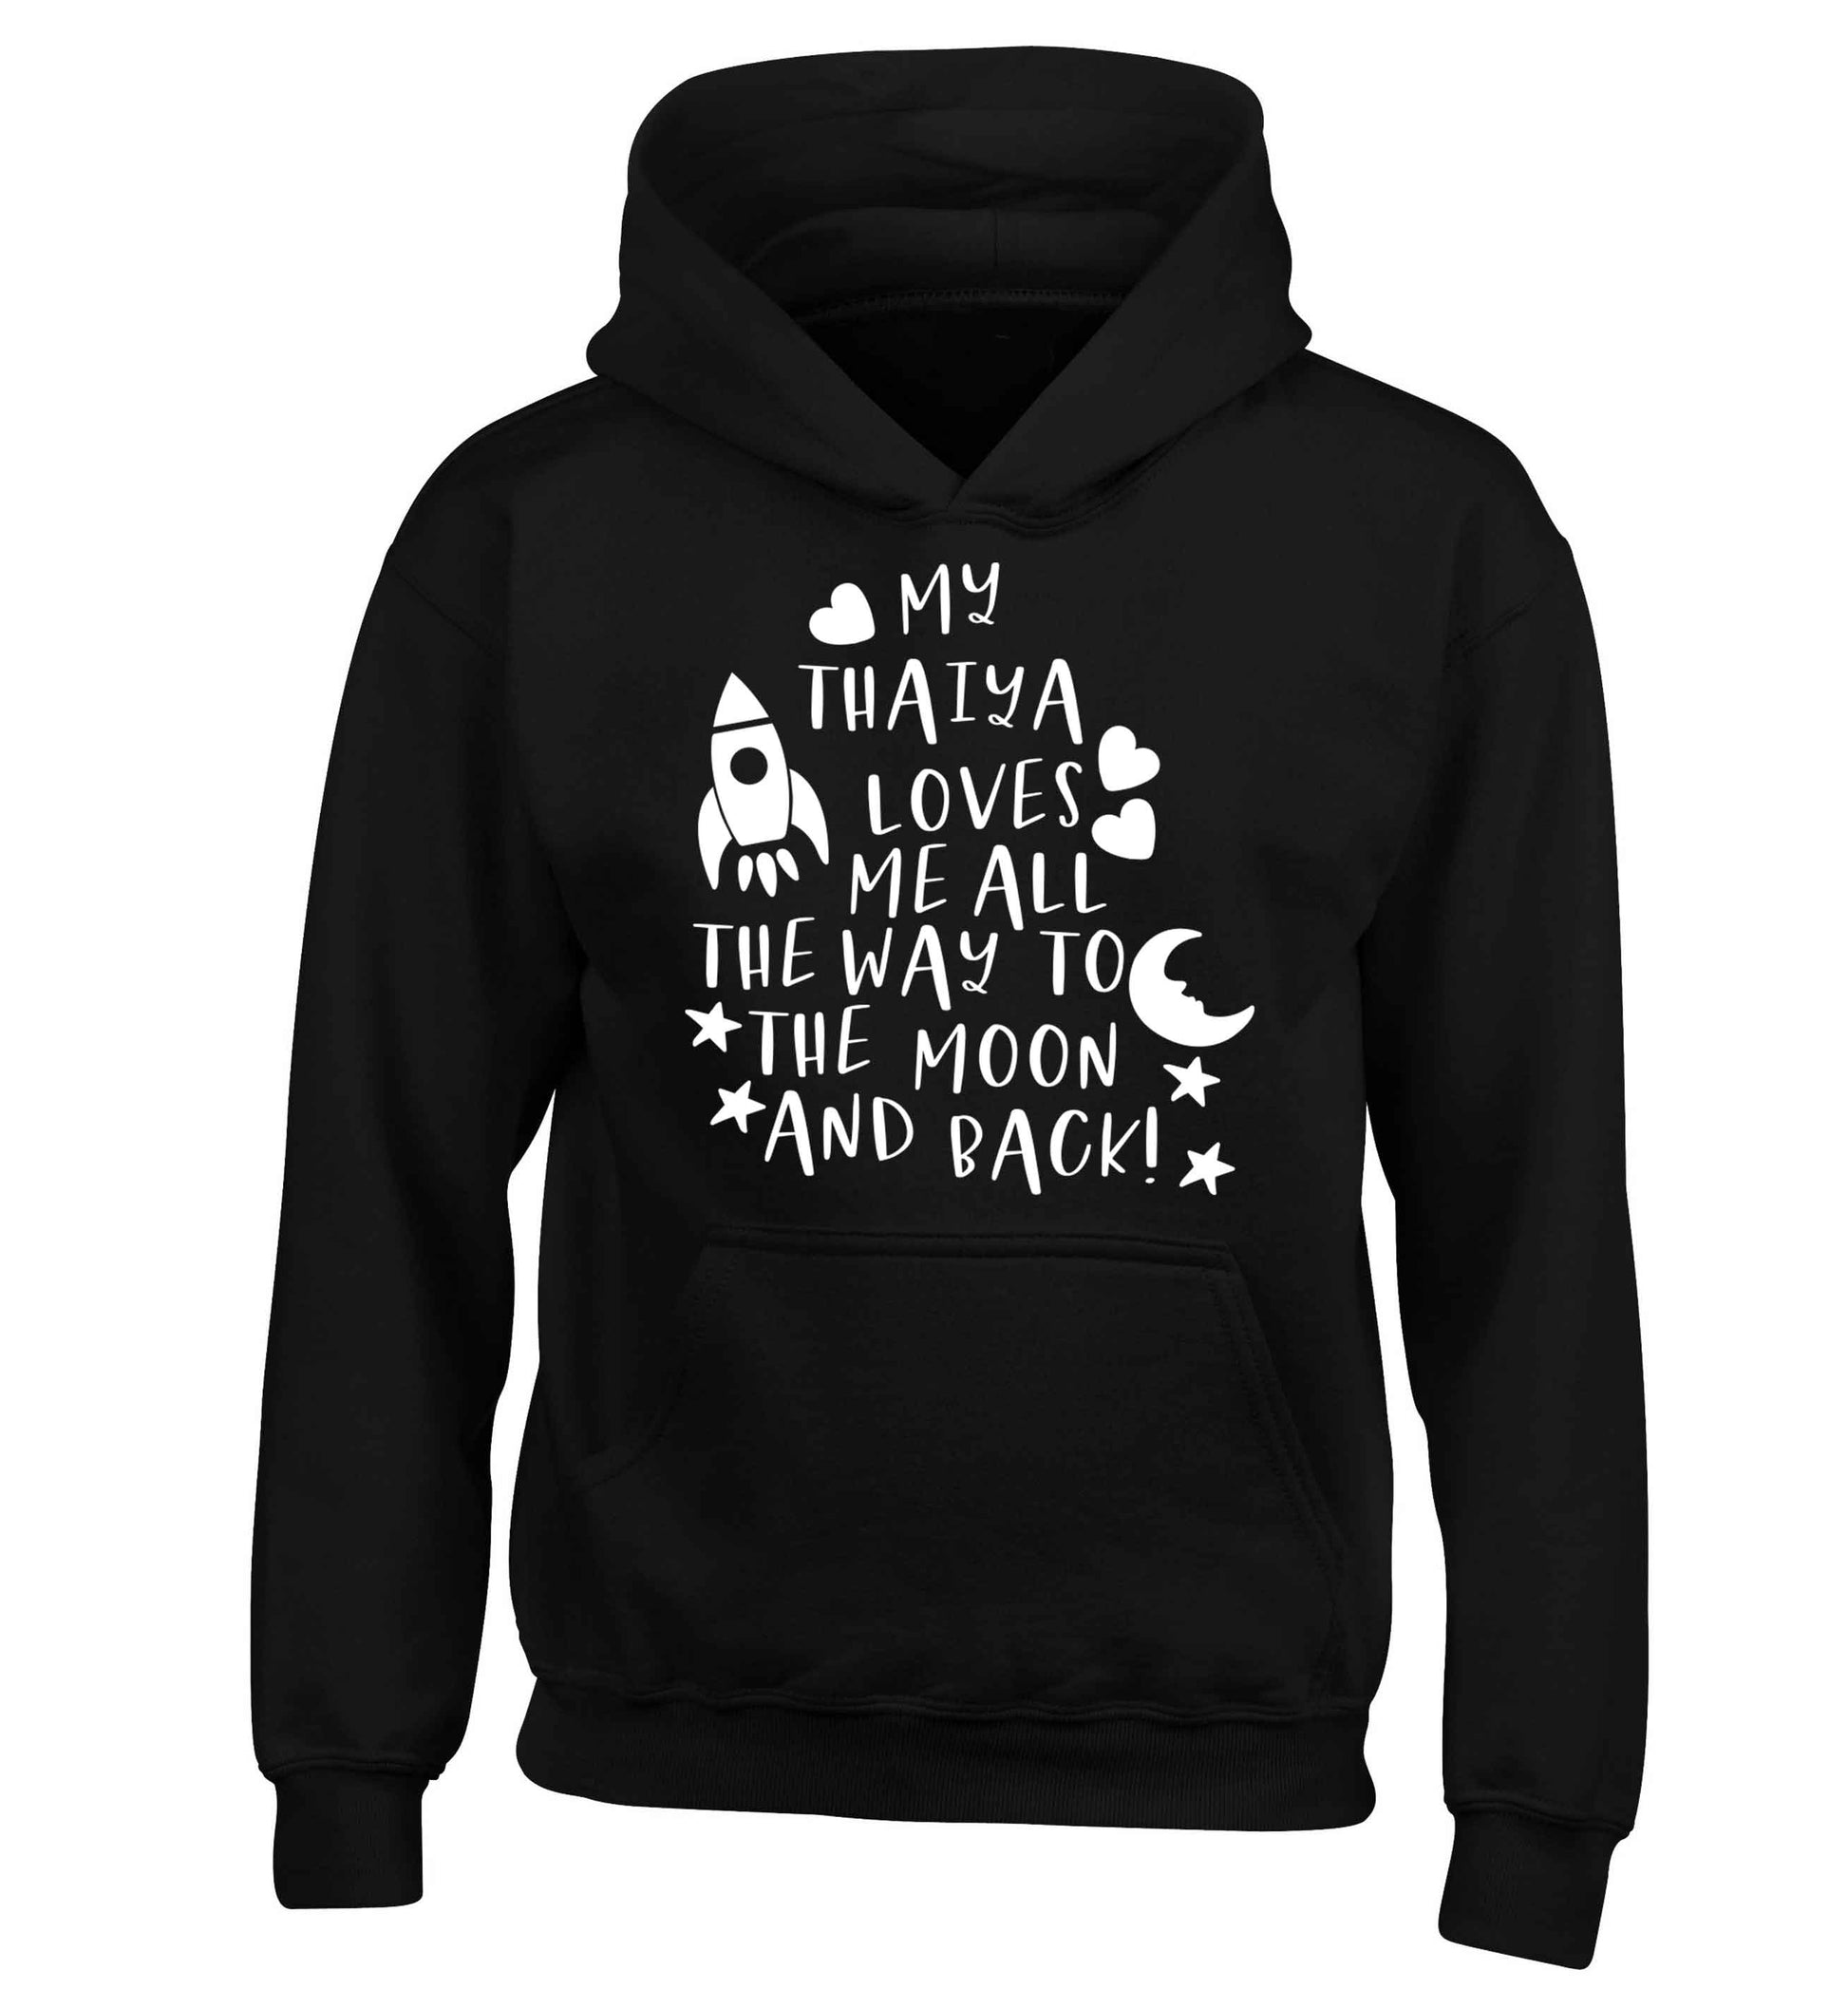 My thaiya loves me all the way to the moon and back children's black hoodie 12-13 Years